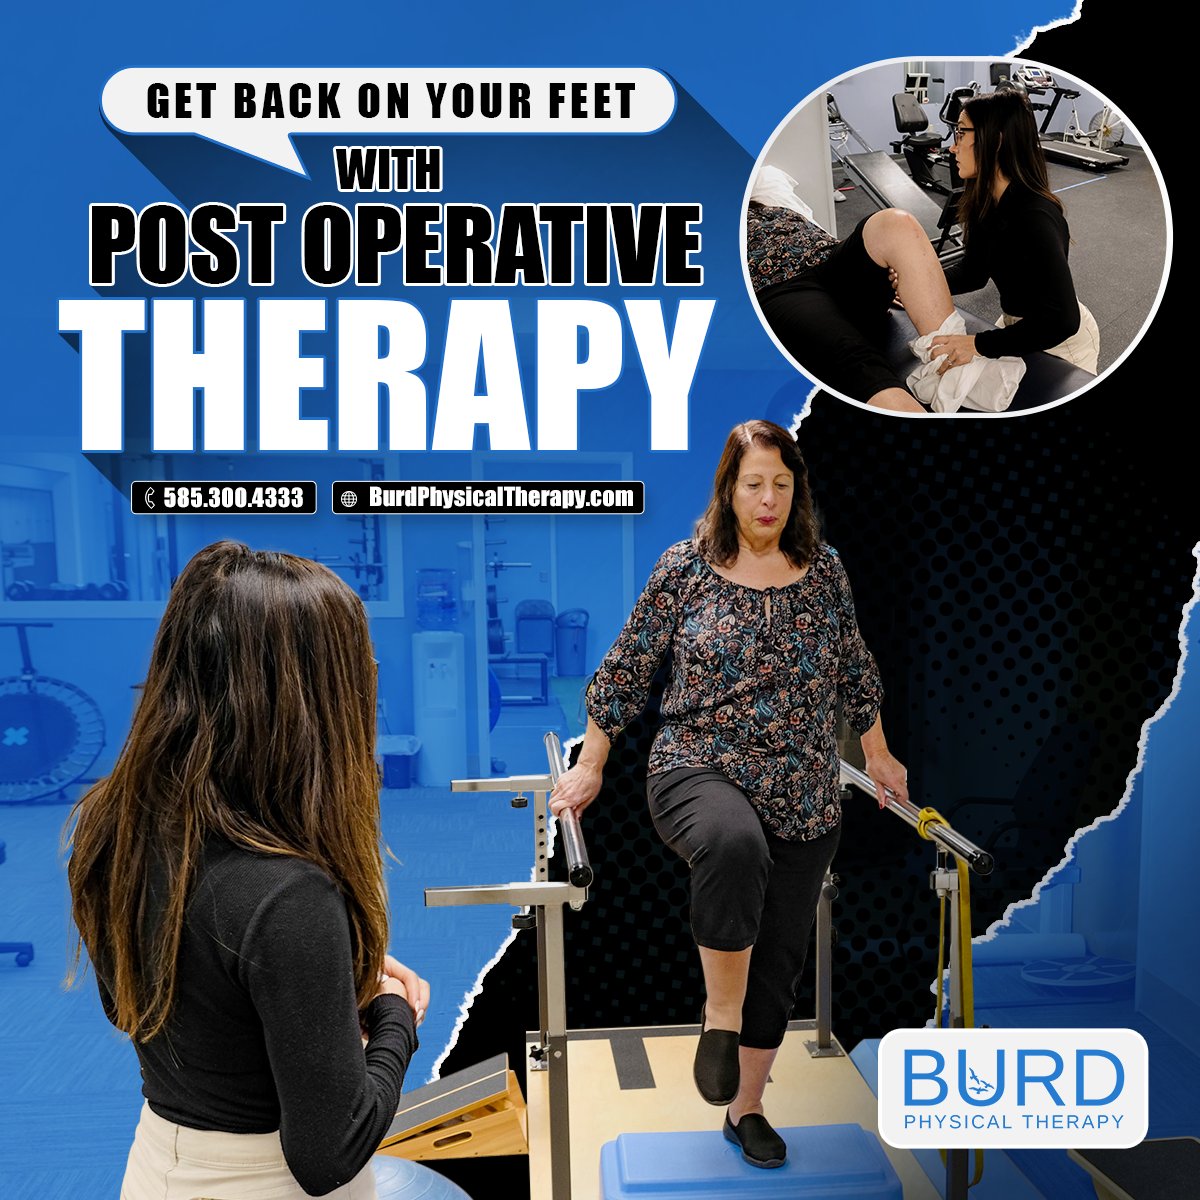 At BURD Physical Therapy, we understand that post-operative care is crucial for a successful recovery. 

#BURDPhysicalTherapy | #PostOperativeCare | #Rehabilitation | #PhysicalTherapy | #RecoveryJourney | #PainFreeRecovery